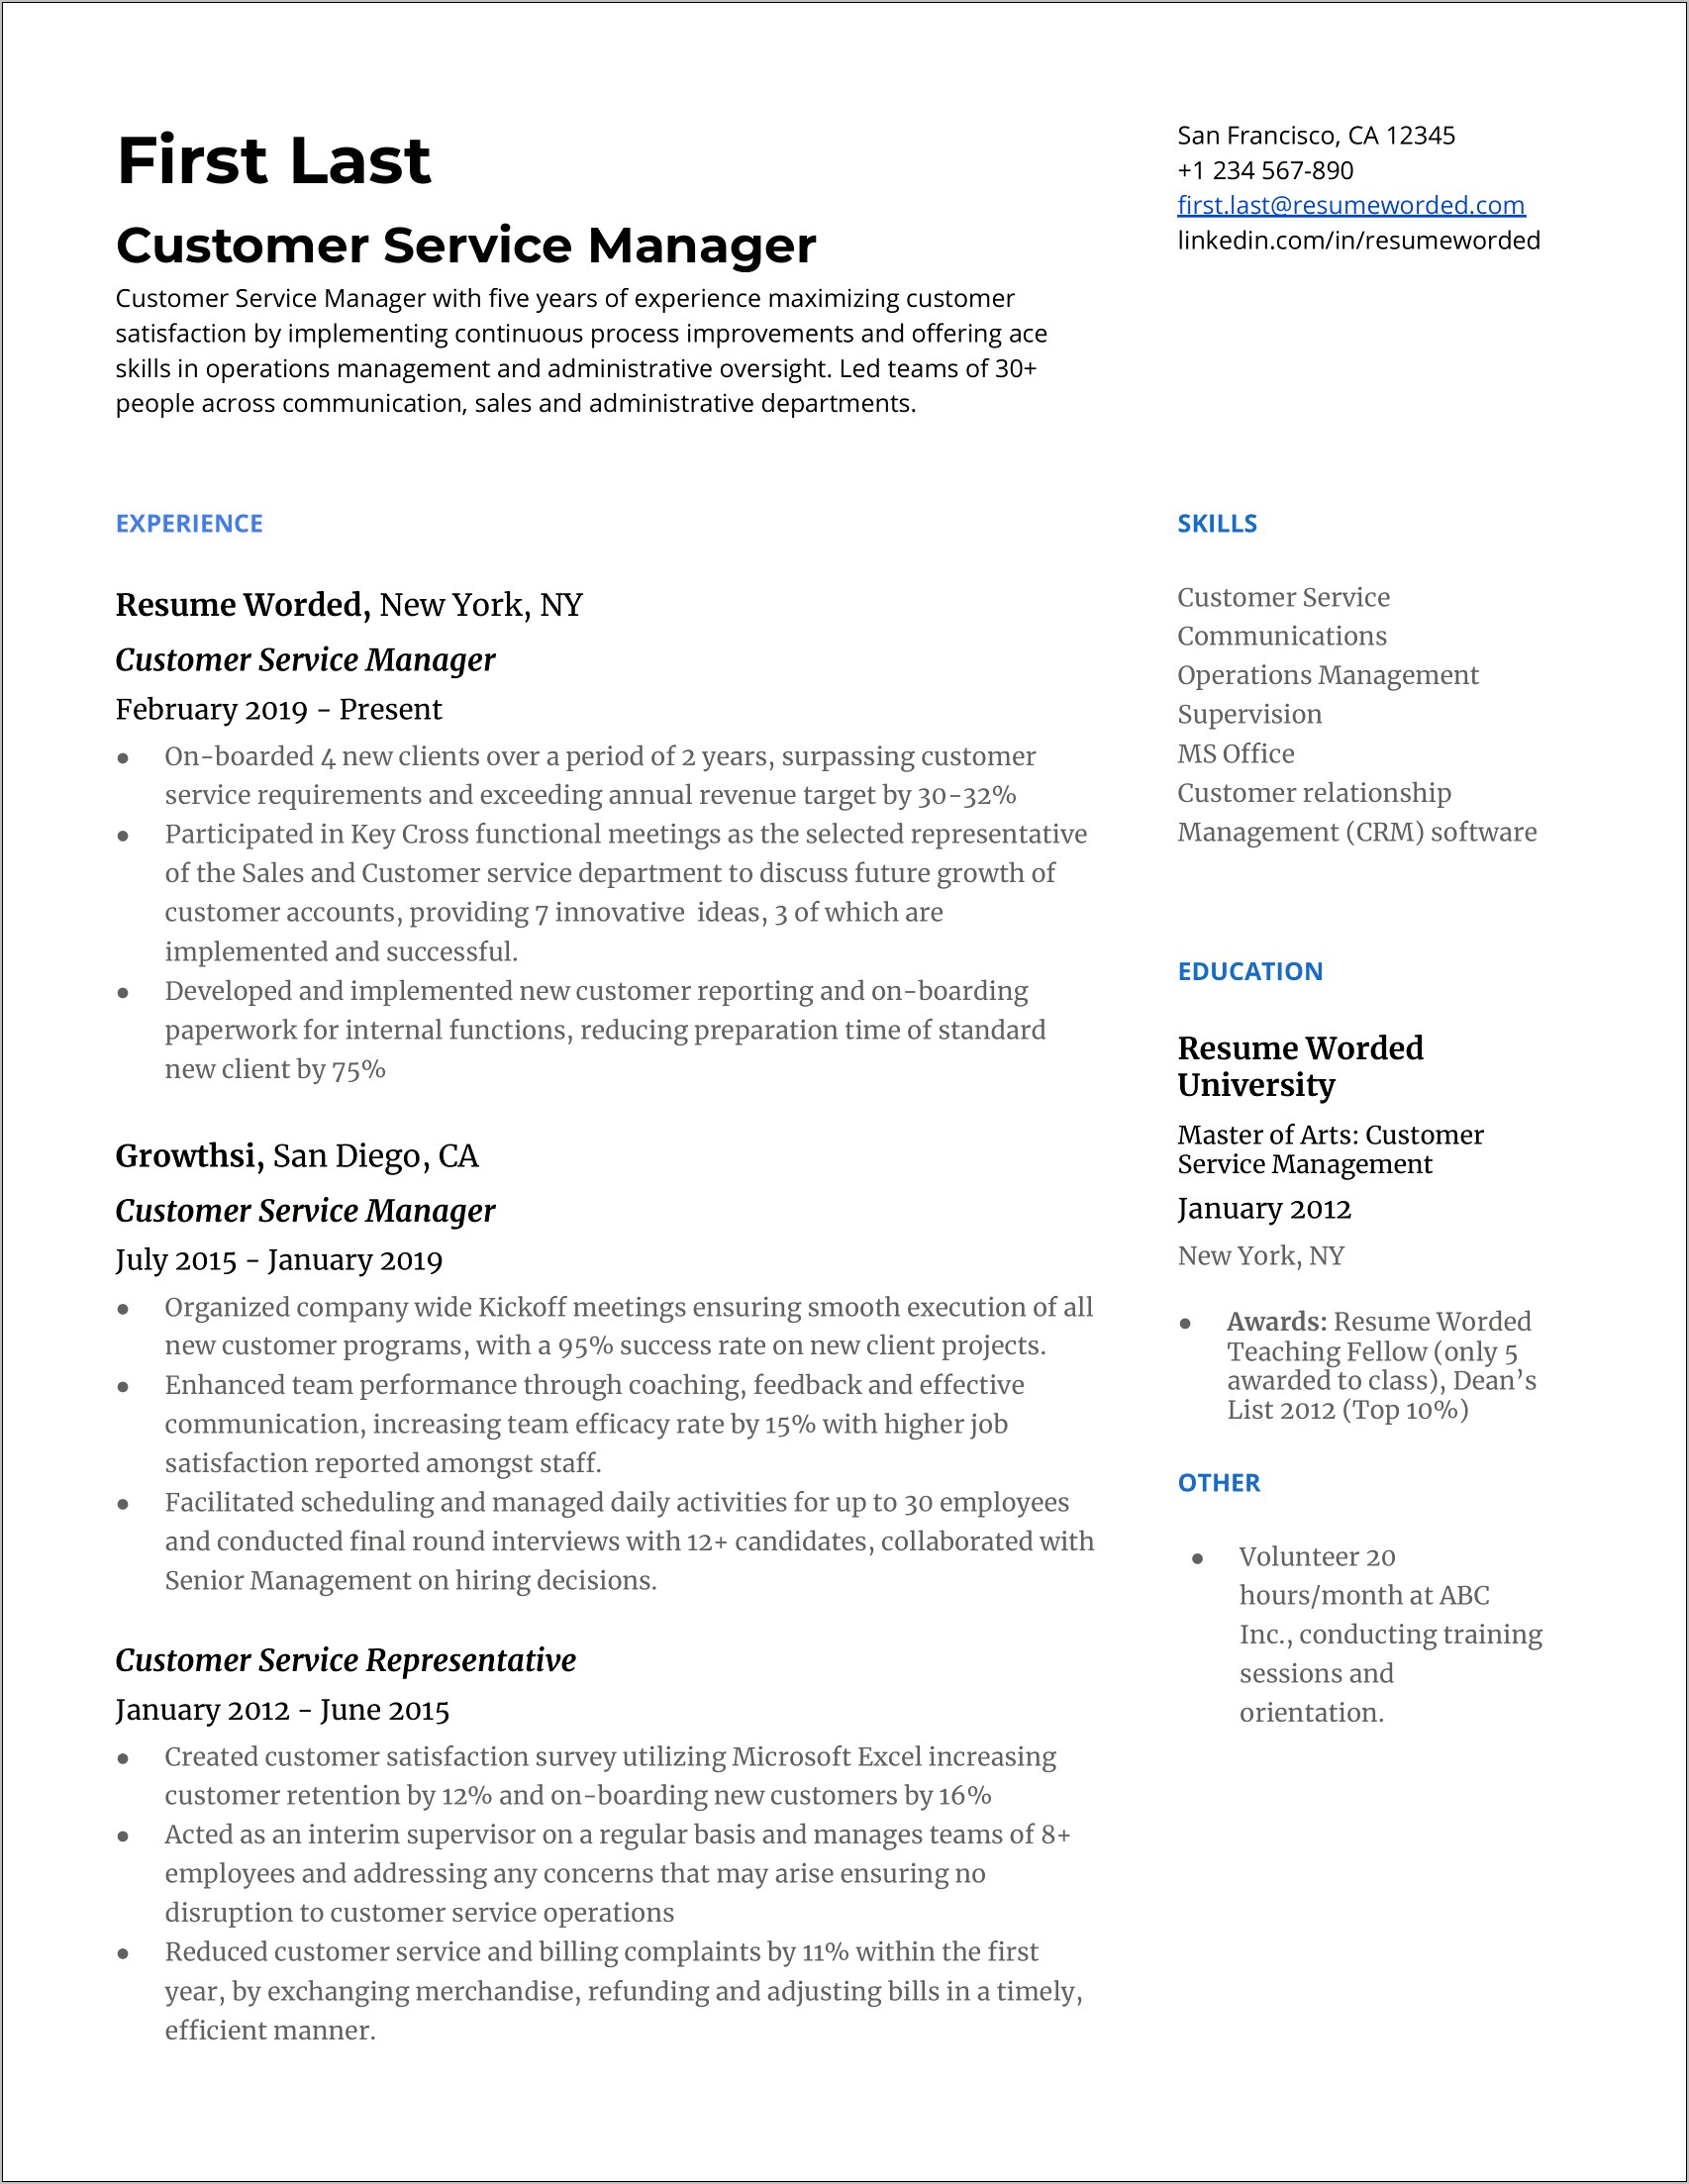 2019 Resume Examples For Administrative Assistants